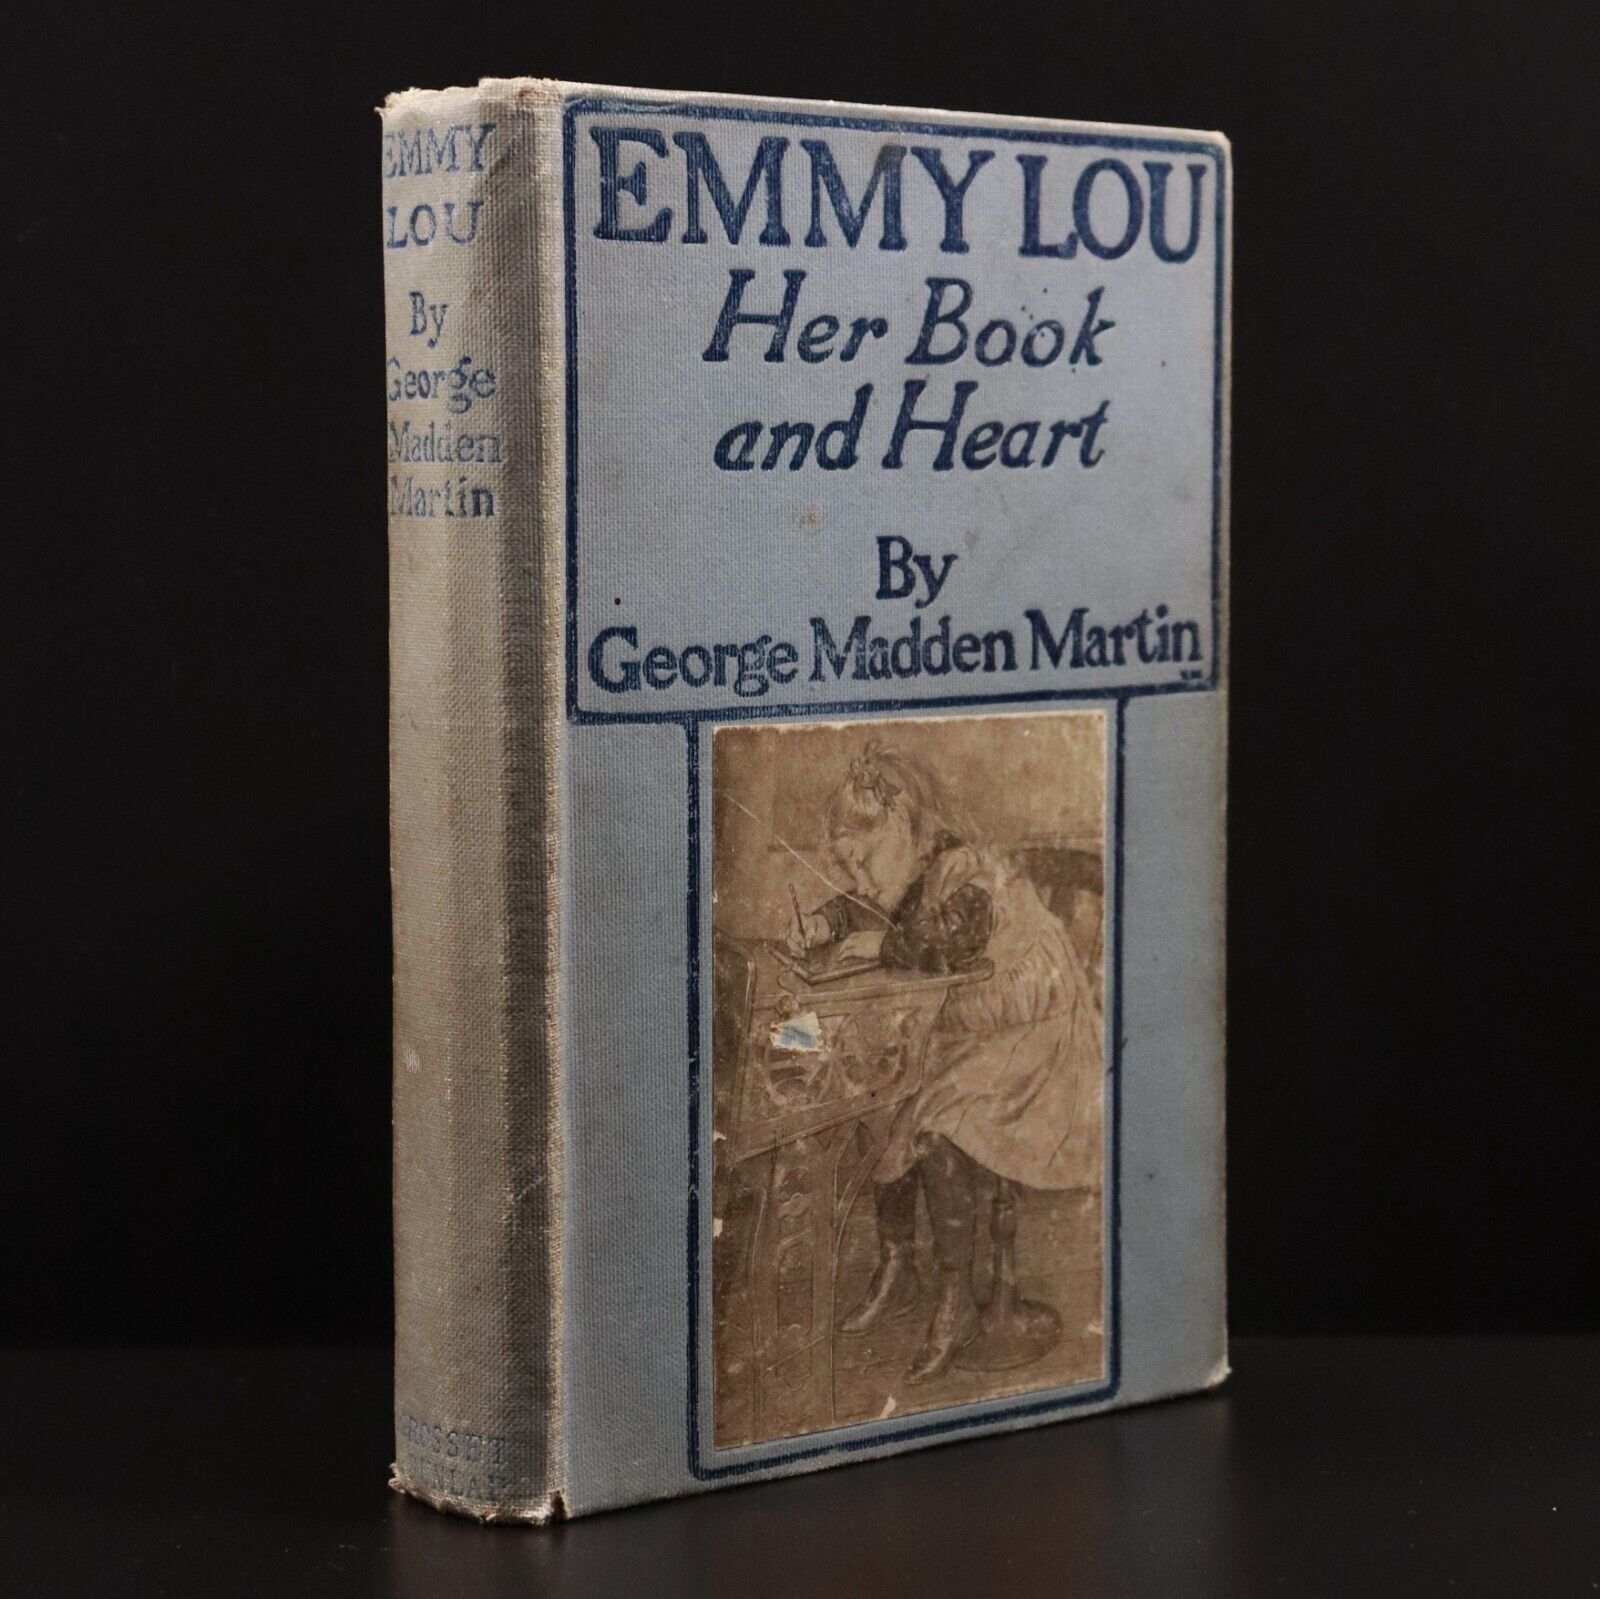 c1902 Emmy Lou Her Book & Heart by GM Martin Antique American Fiction Book